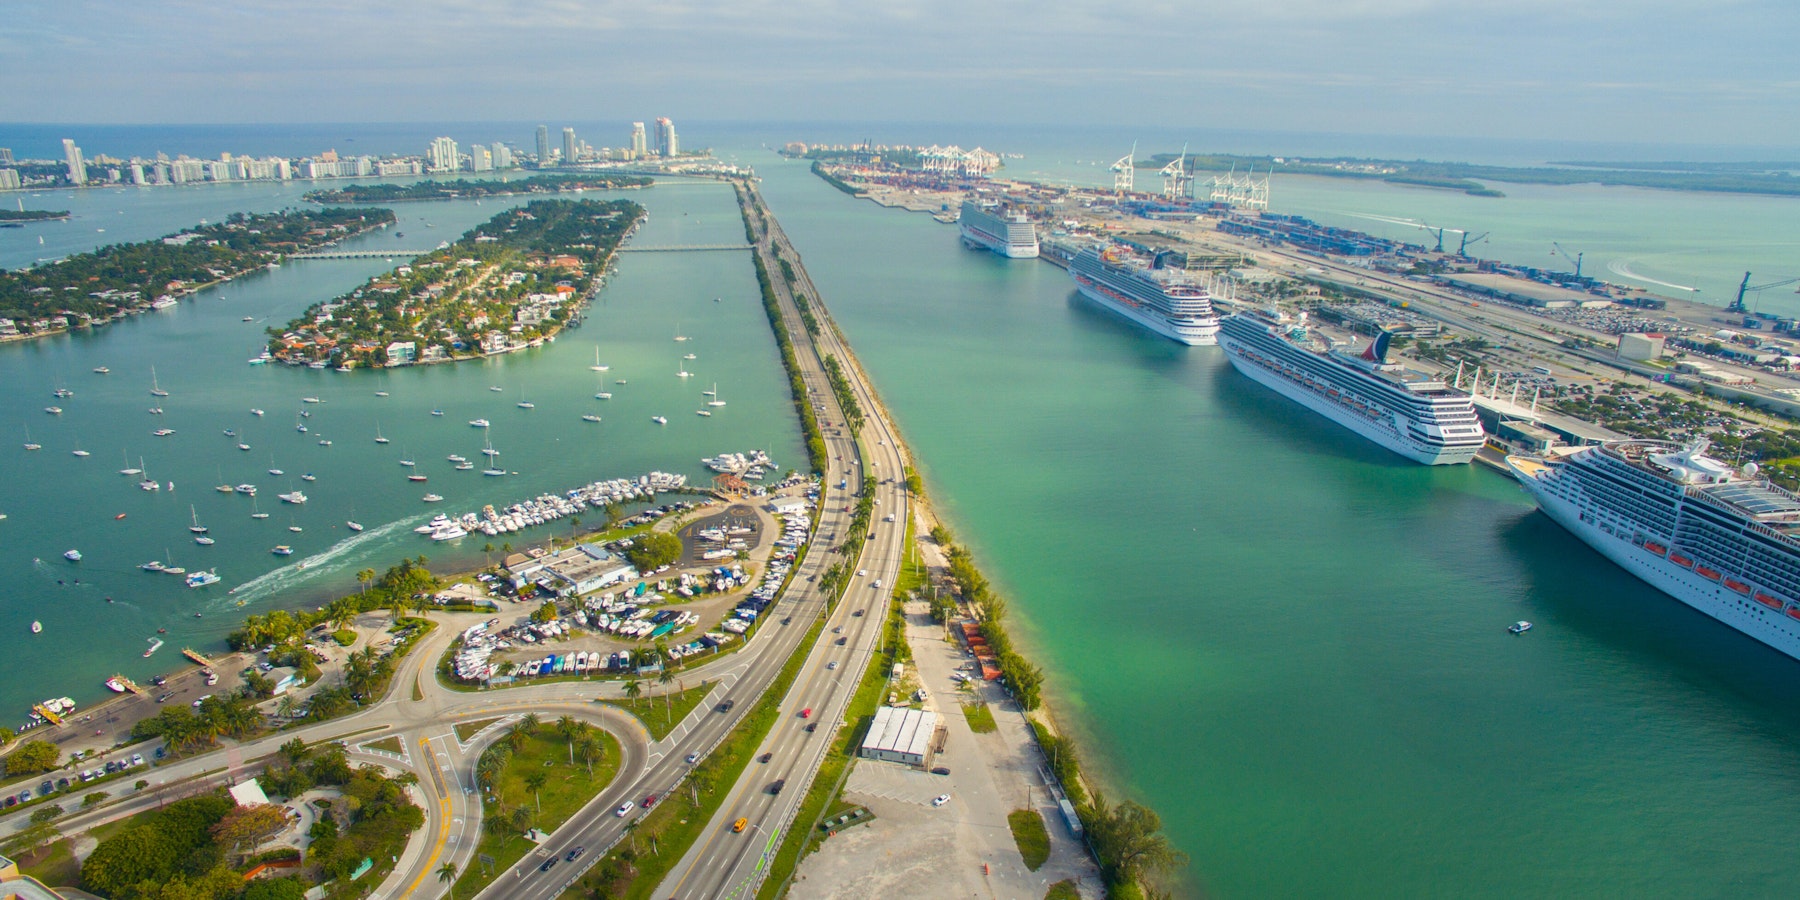 Cruise Ports Near Me: Find the Closest Homeport for No-Fly Cruises